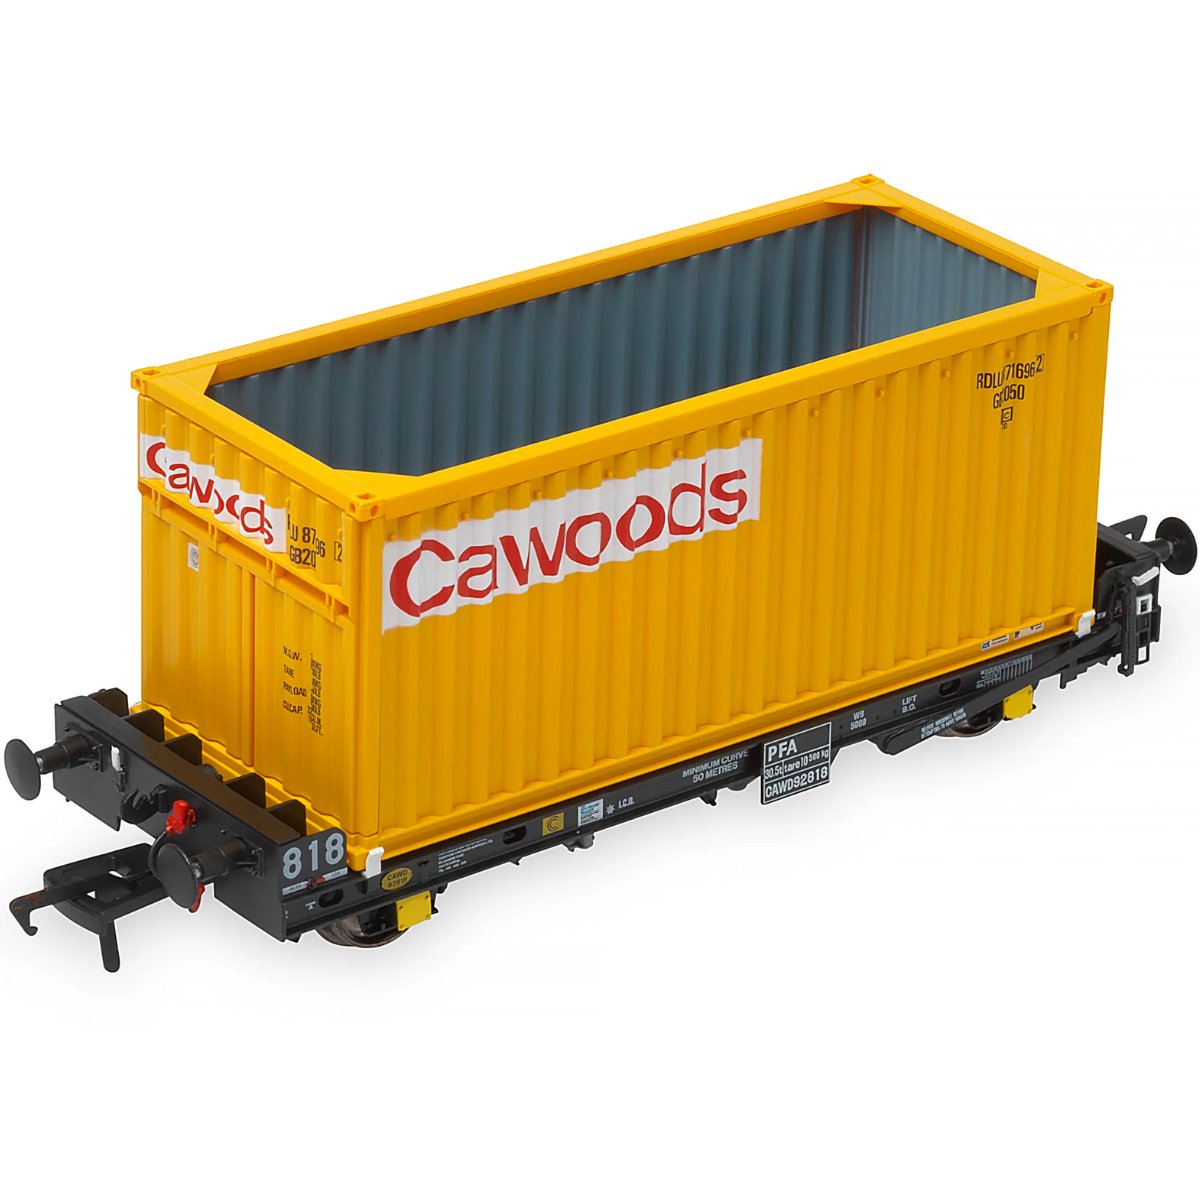 Accurascale PFA - Cawoods Coal Containers E - Phillips Hobbies